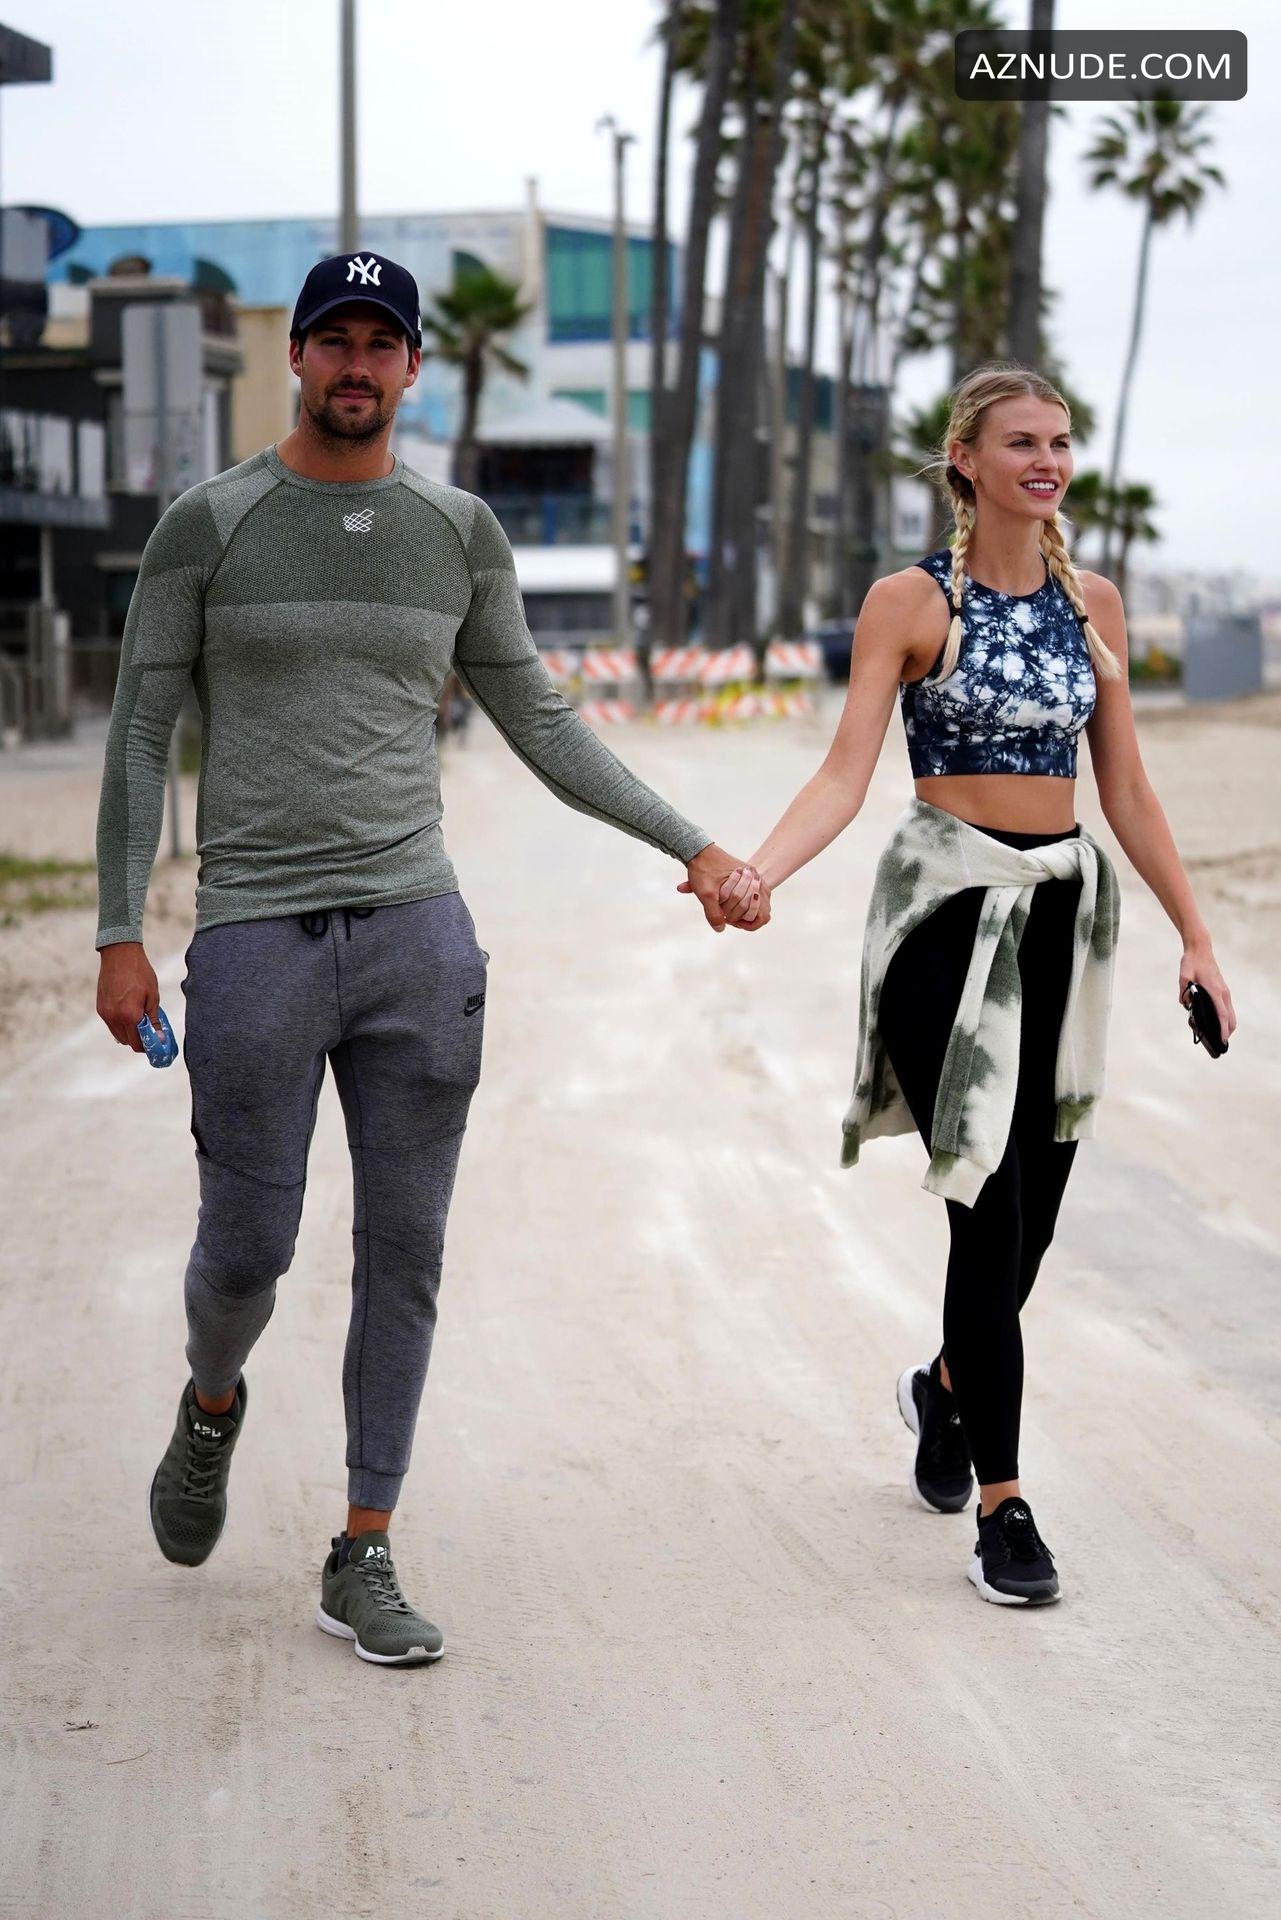 James Maslow And His Girlfriend Caitlin Spears Share A Kiss After A Run